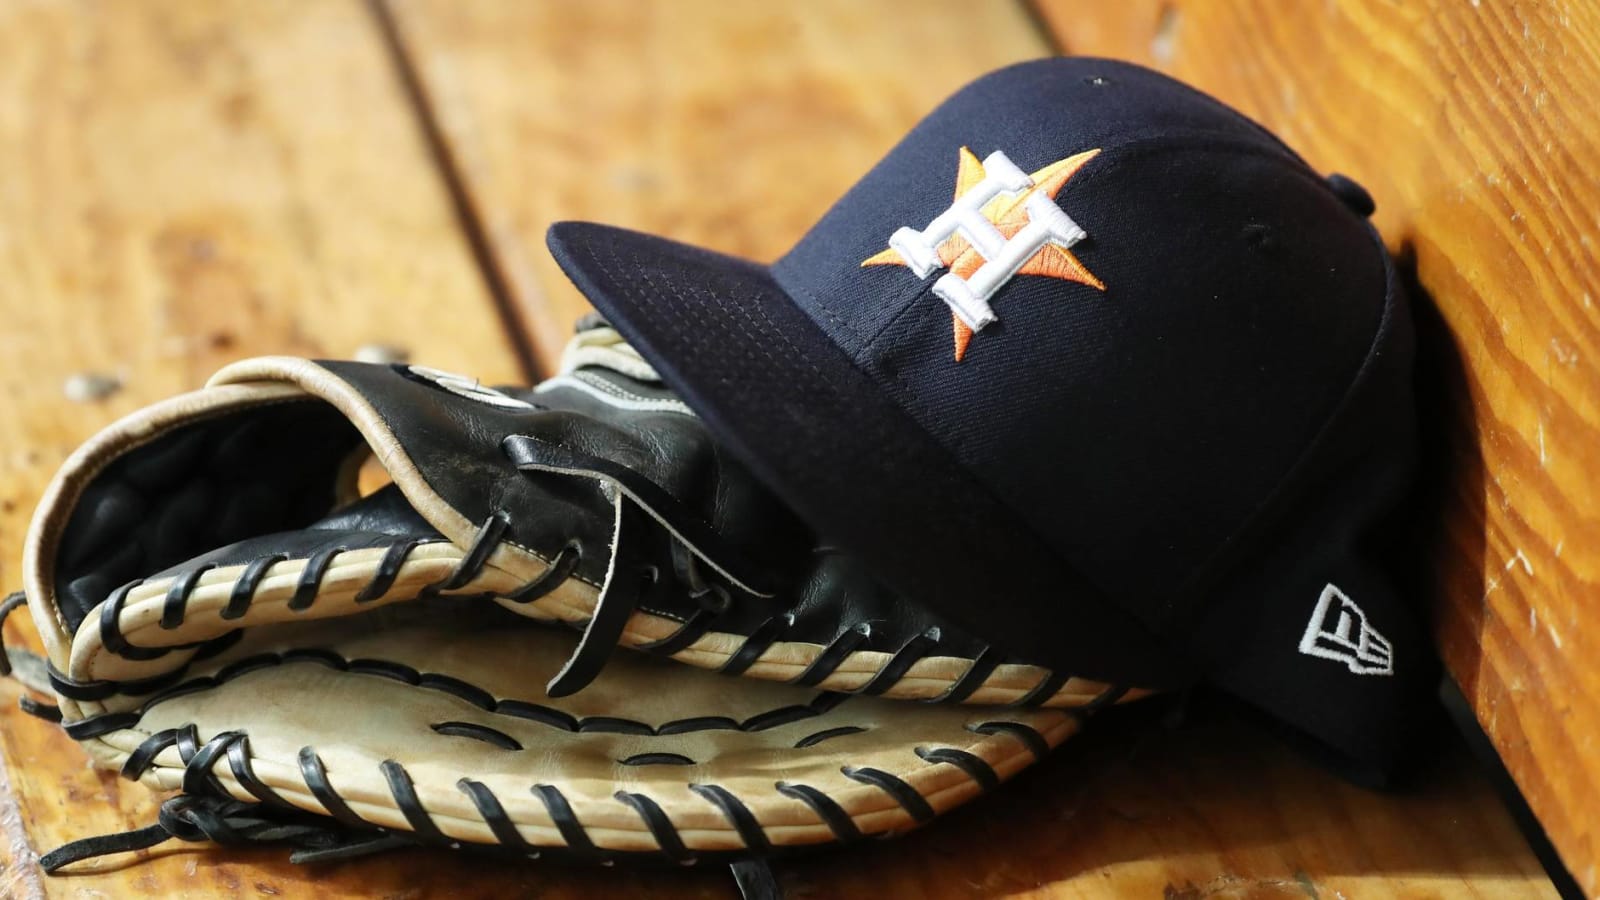 Astros' alleged cheating setup with trash can, monitor revealed